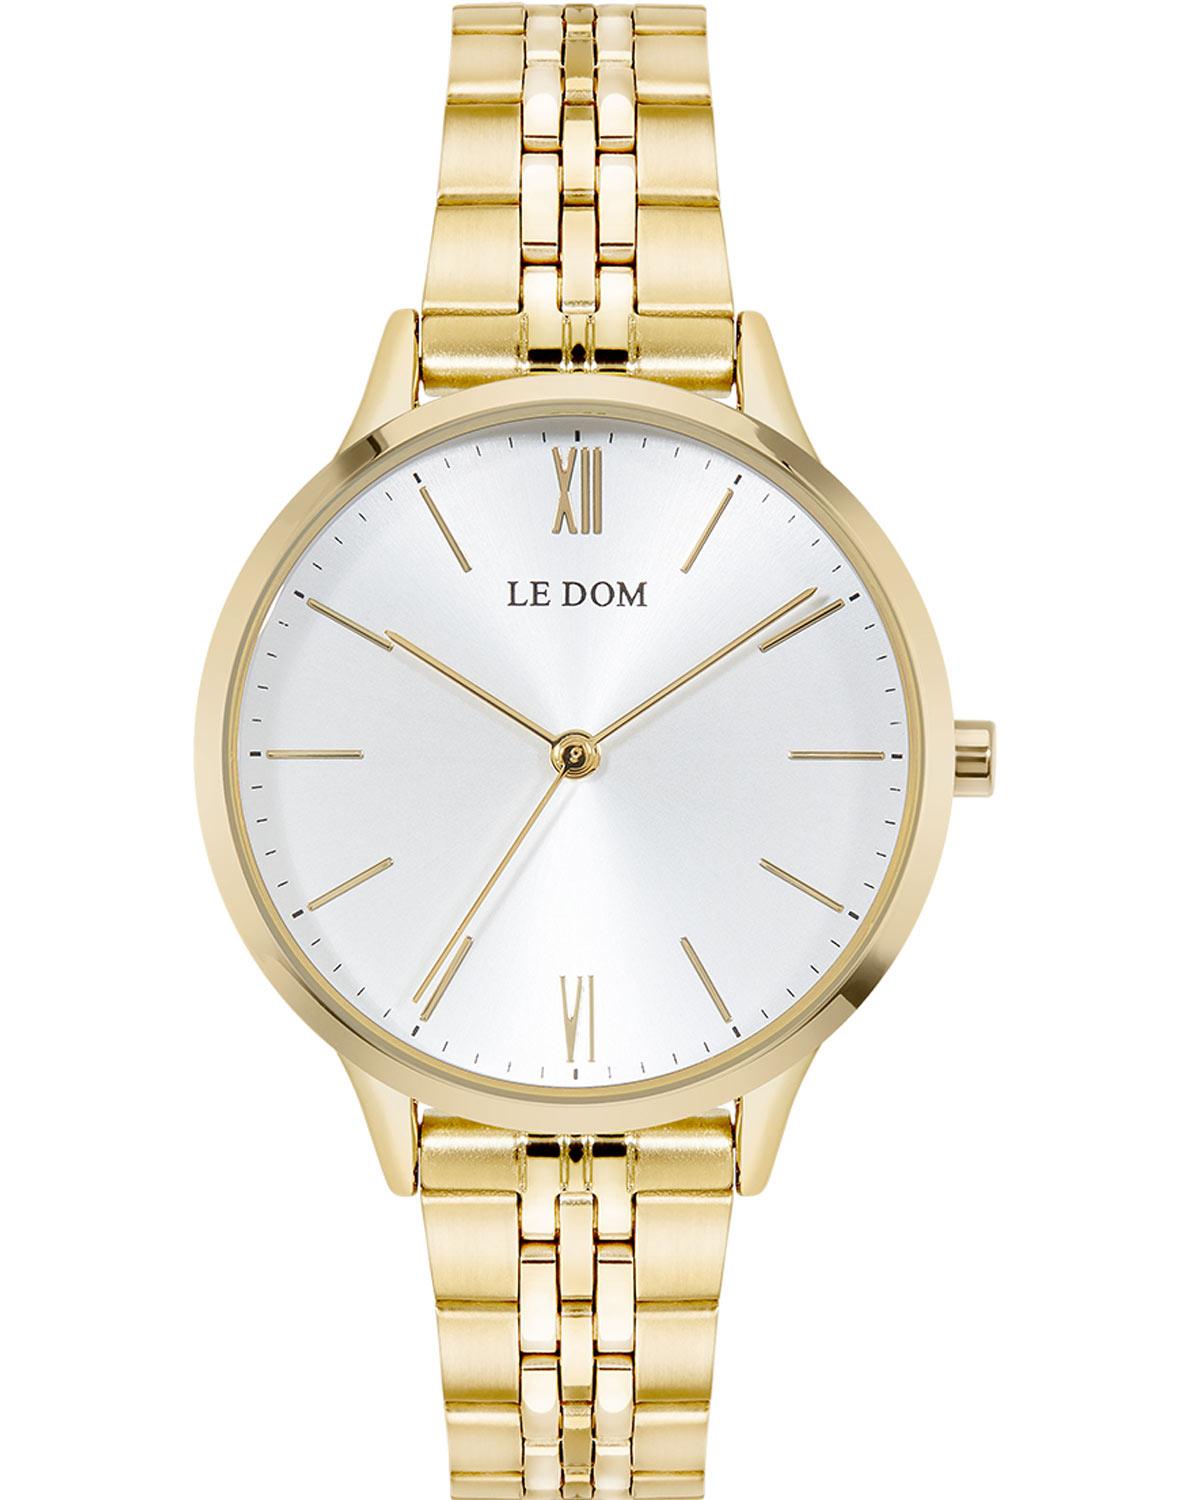 le dom essence ld 1275 6 gold case with stainless steel bracelet image1